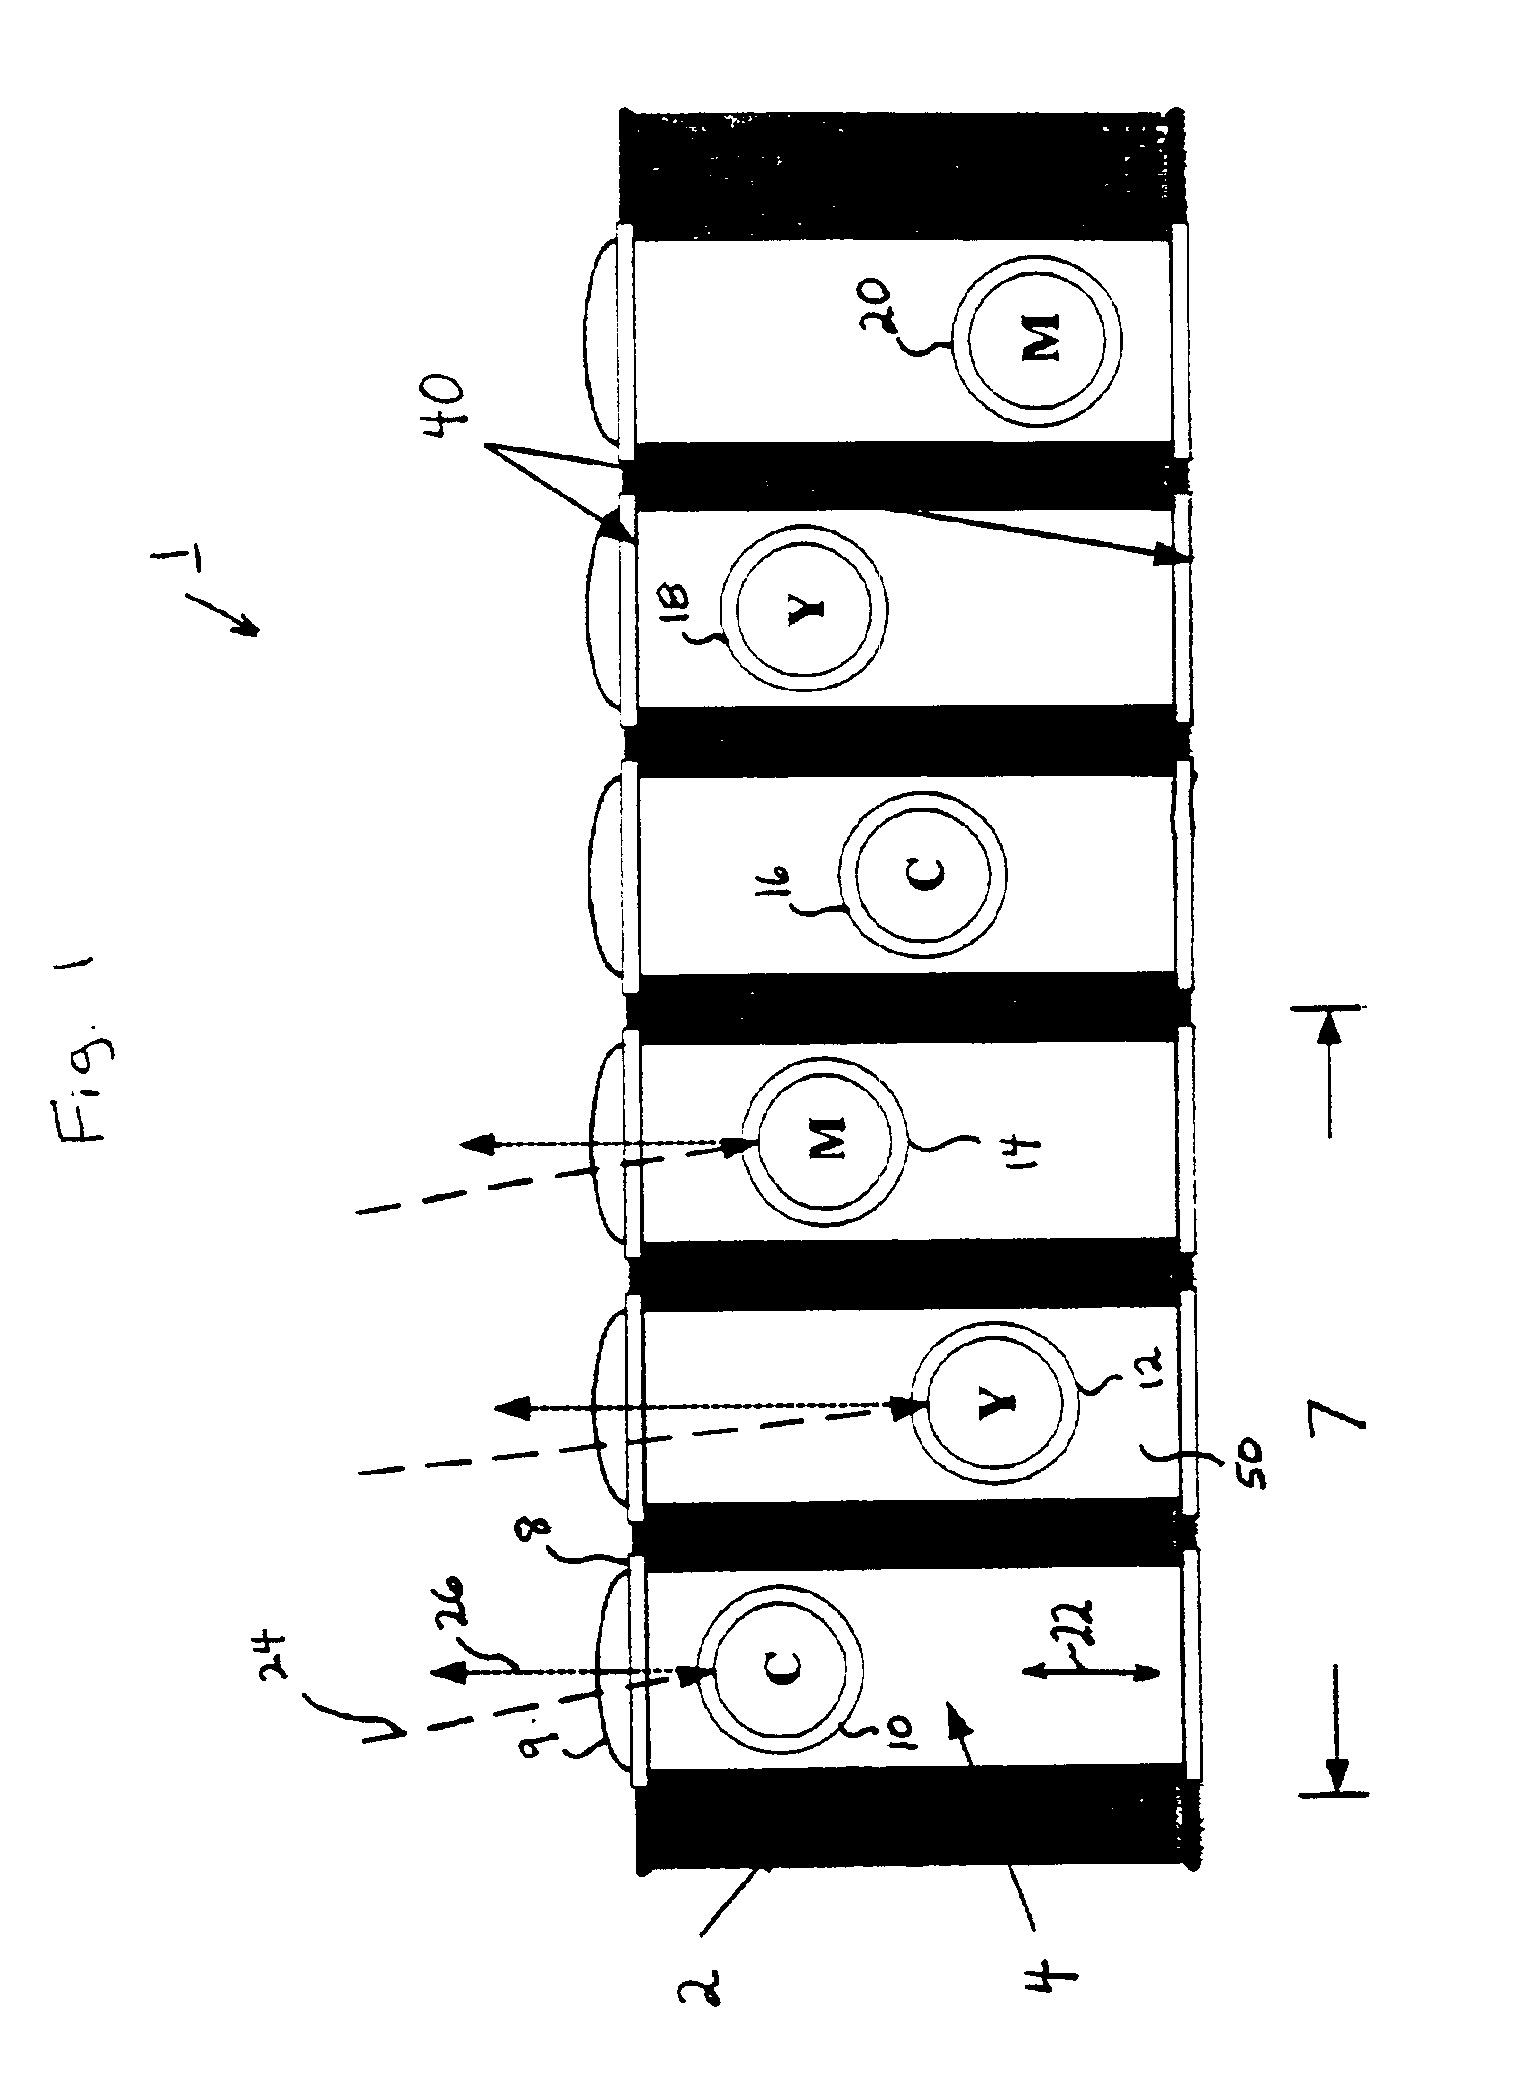 Methods and apparatus for subjecting an element to an electrical field